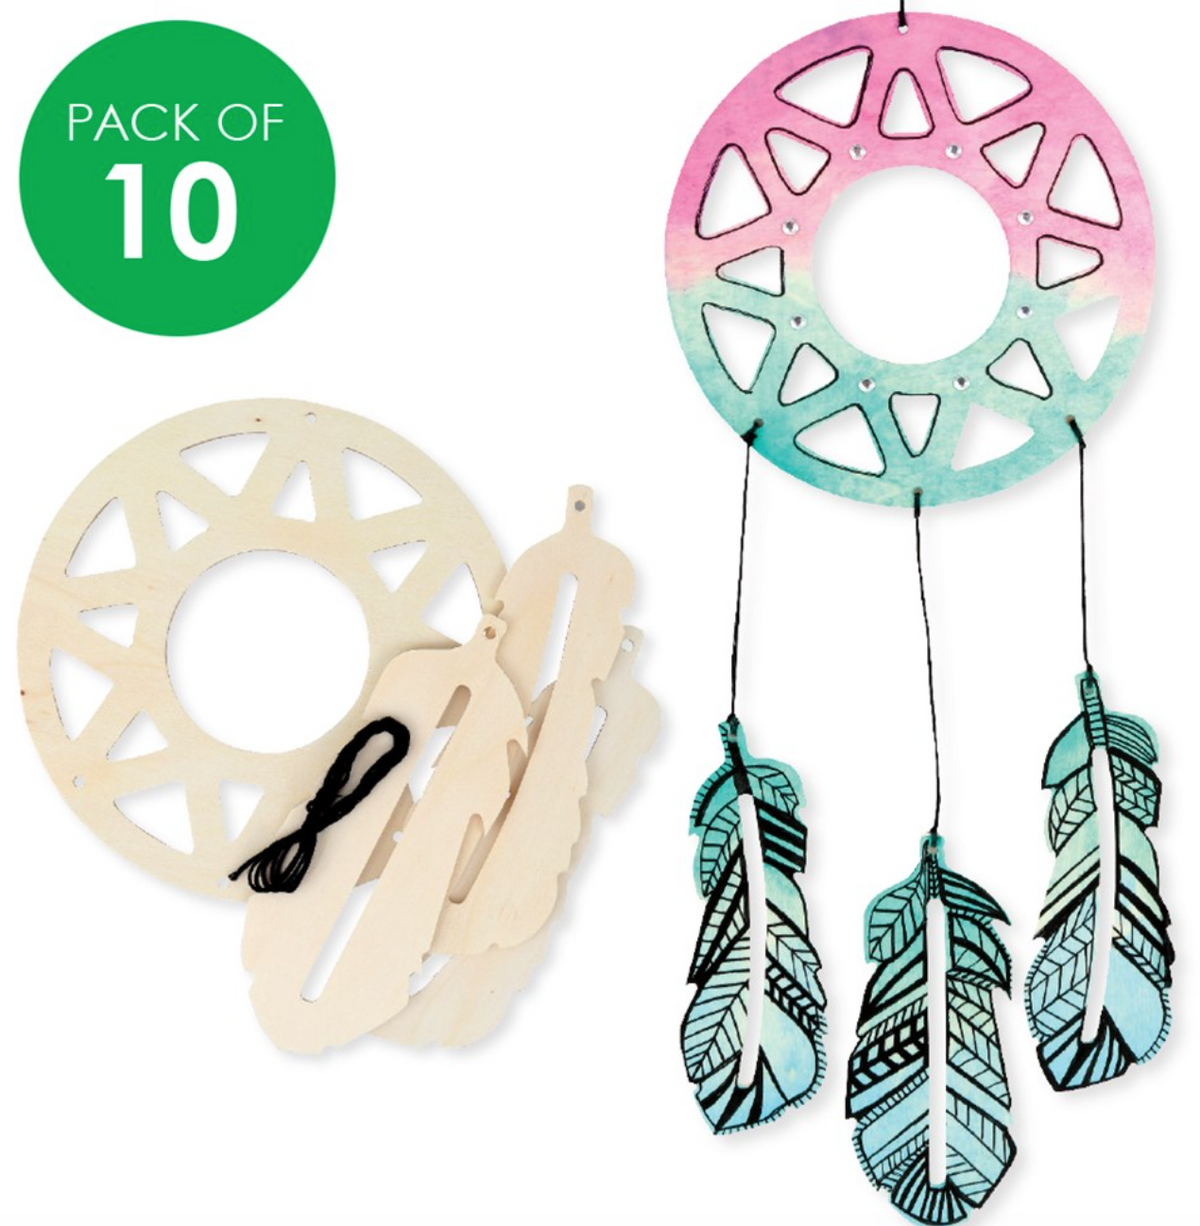 Wooden Dream Catchers - Pack of 10